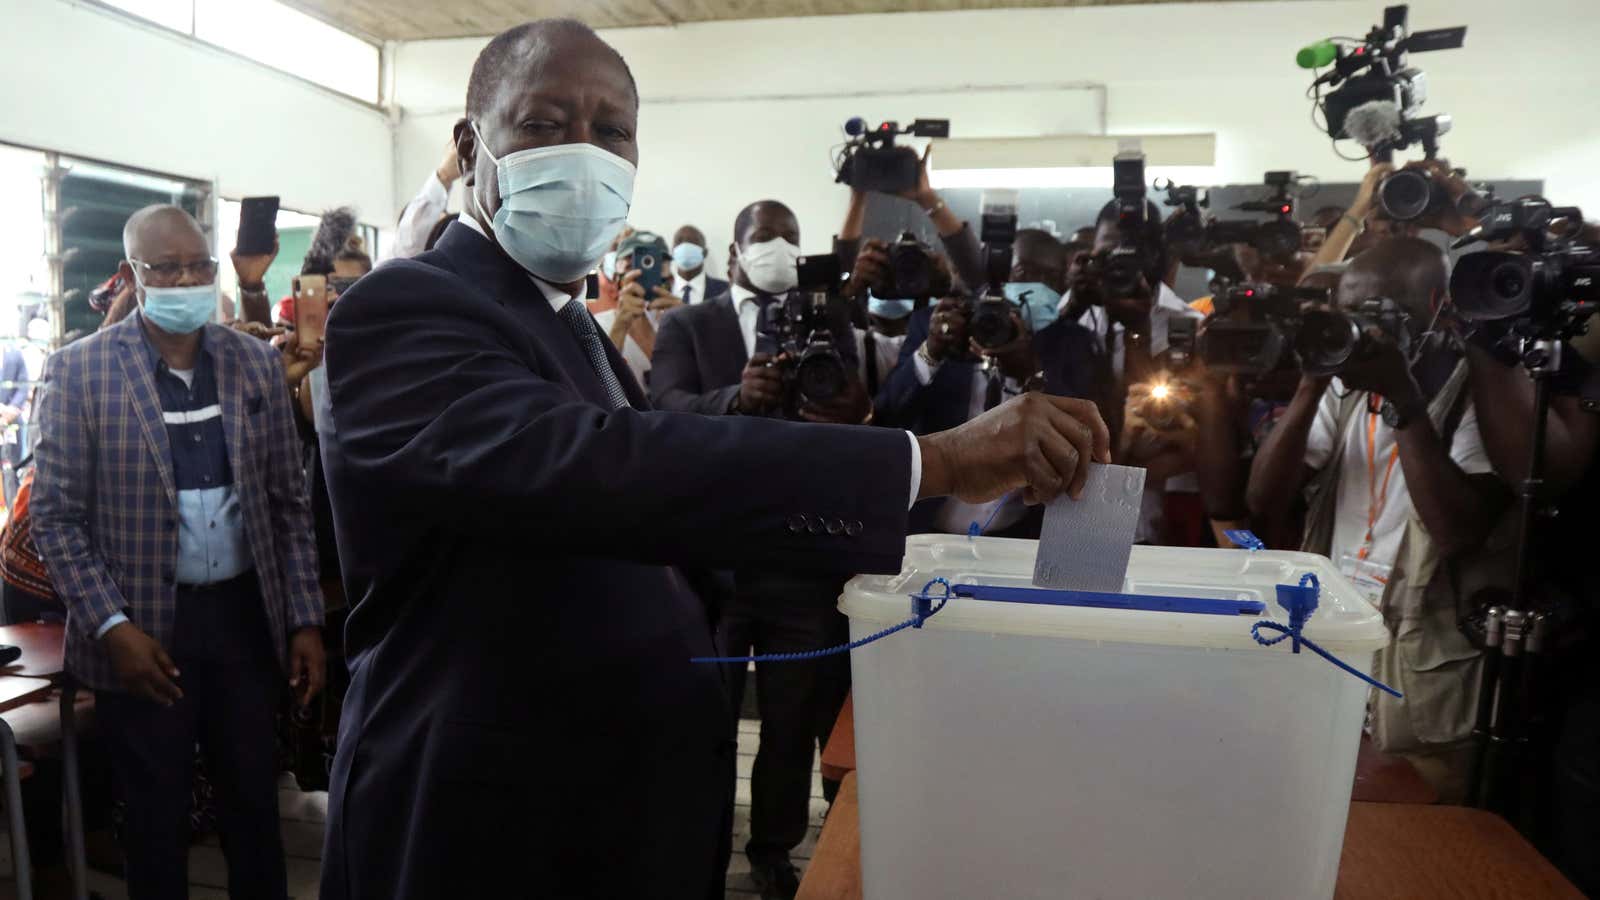 Ivorian president Alassane Ouattara wearing a face mask casts his vote in Abidjan, Ivory Coast Oct. 31, 2020.